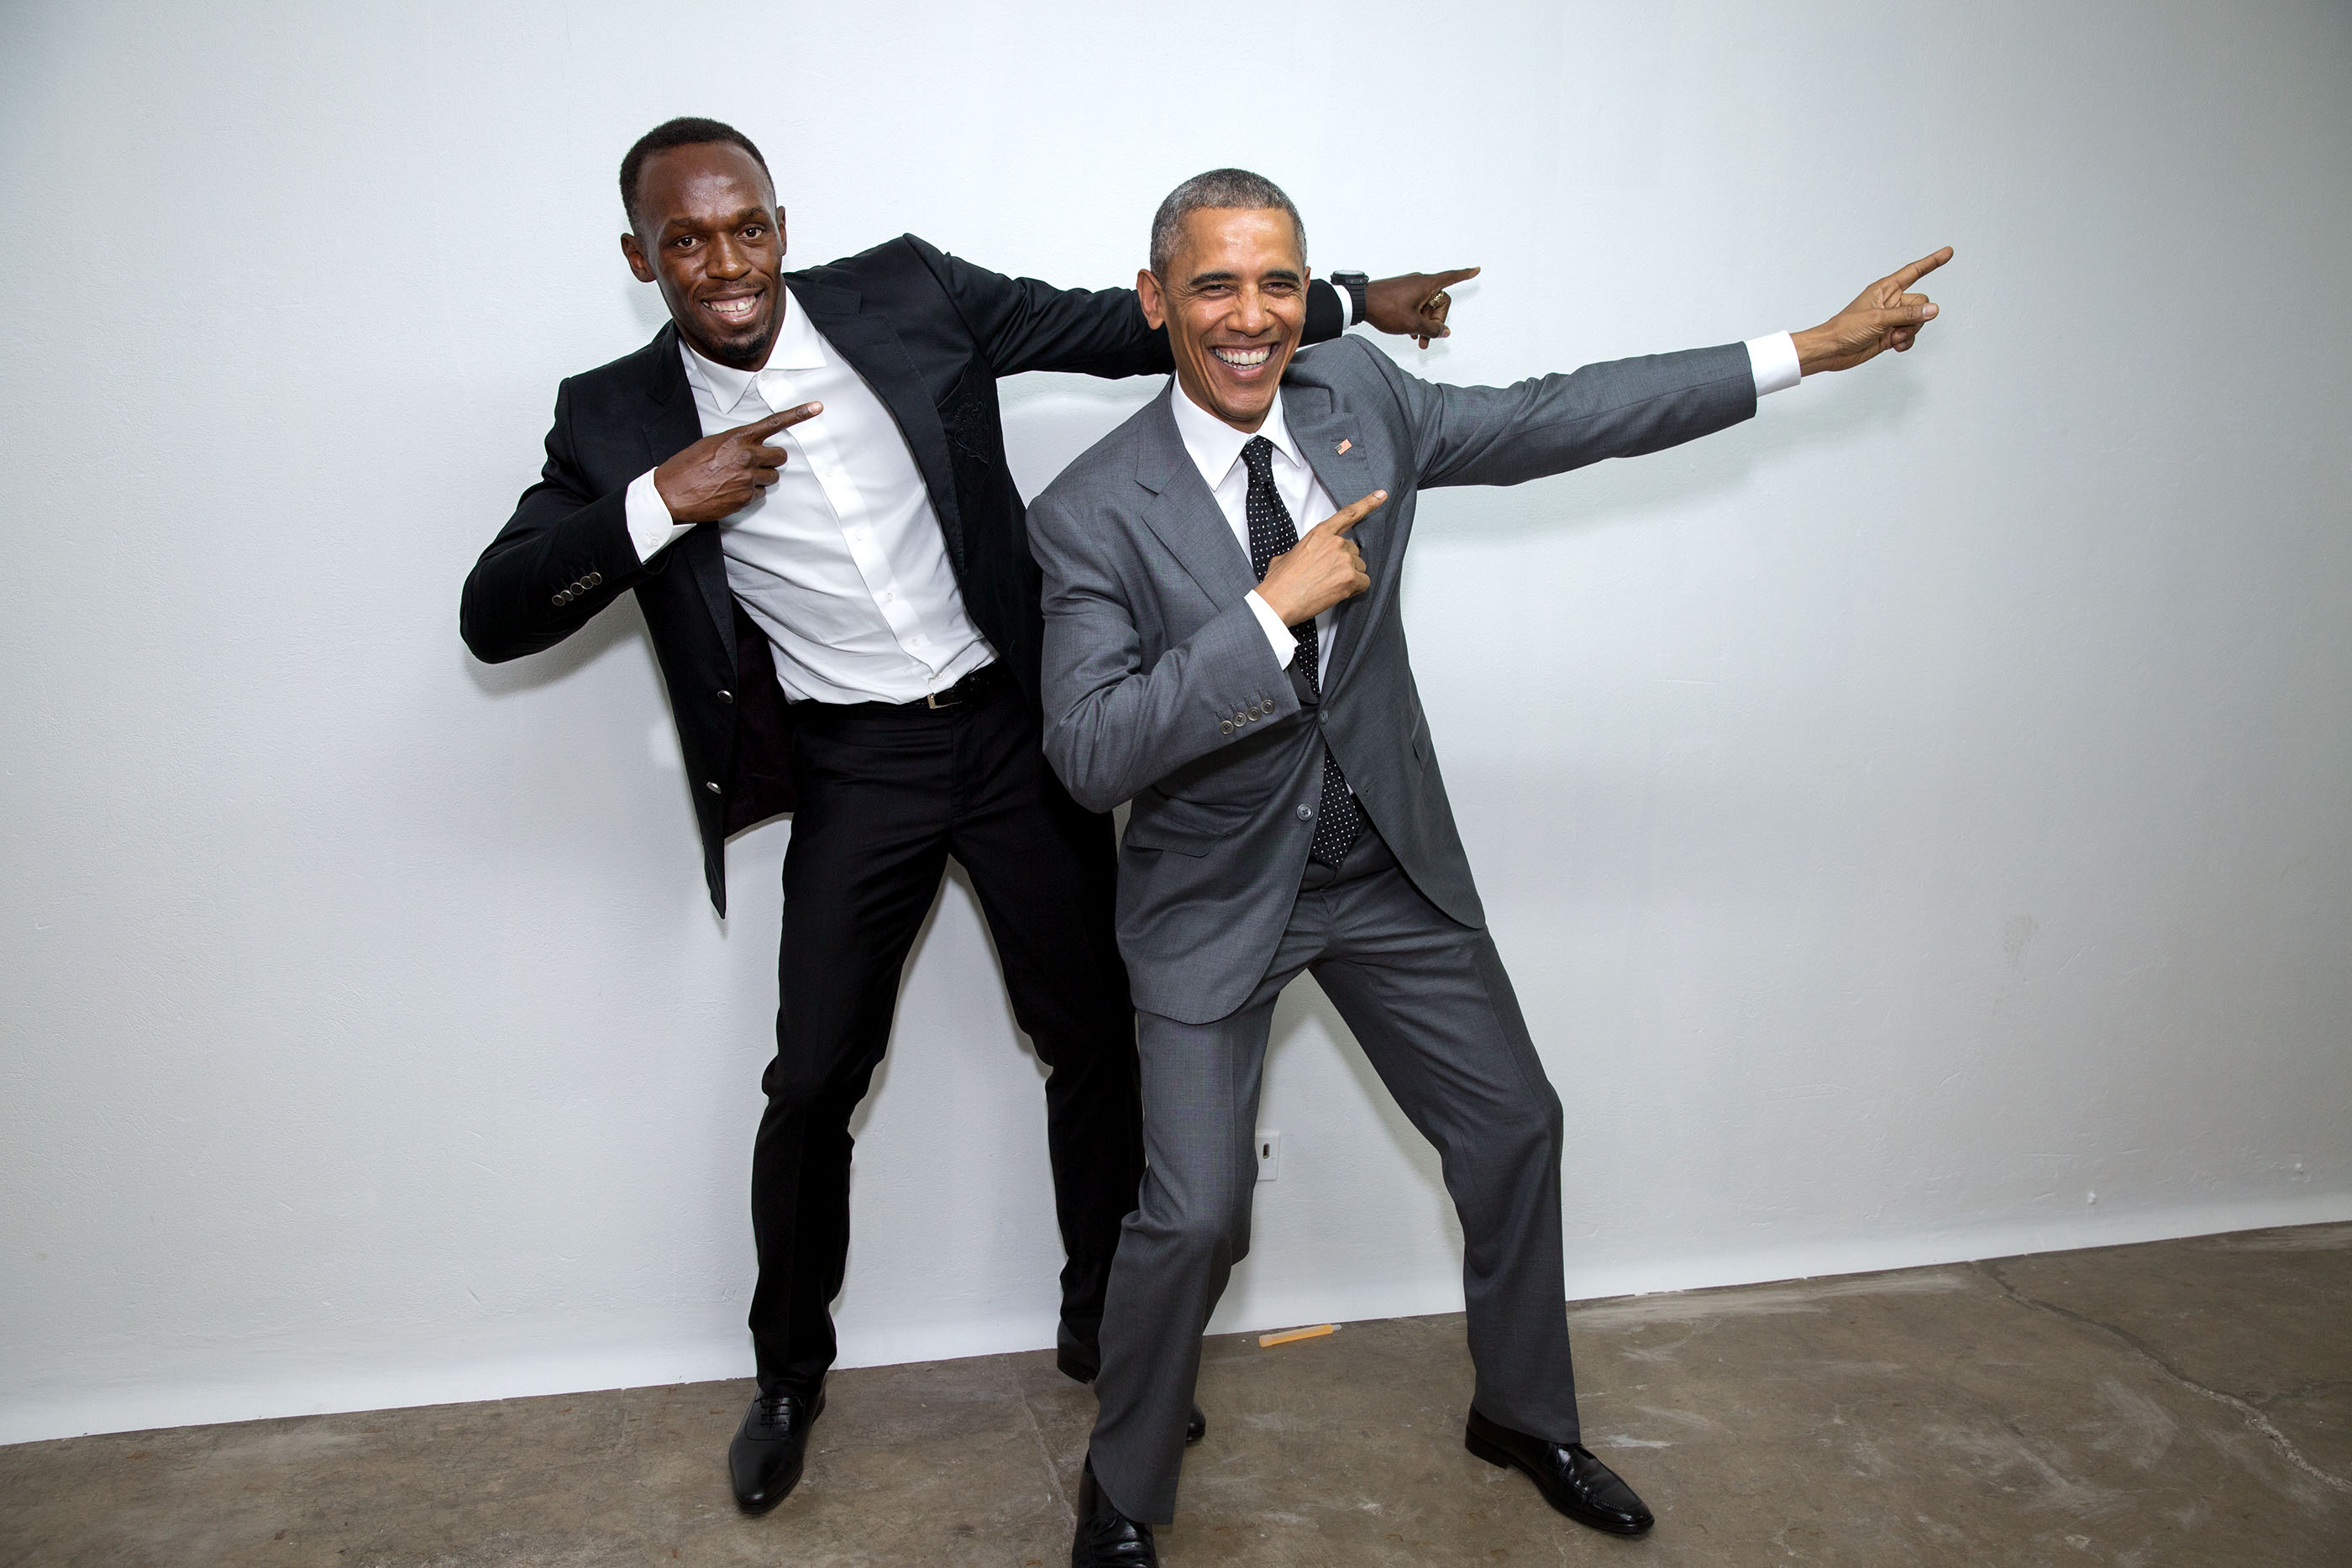 Backstage, the President mimics the victory pose with Usain Bolt, the fastest runner in the world. Bolt, the Jamaican sprinter, attended the town hall. (Official White House Photo by Pete Souza)